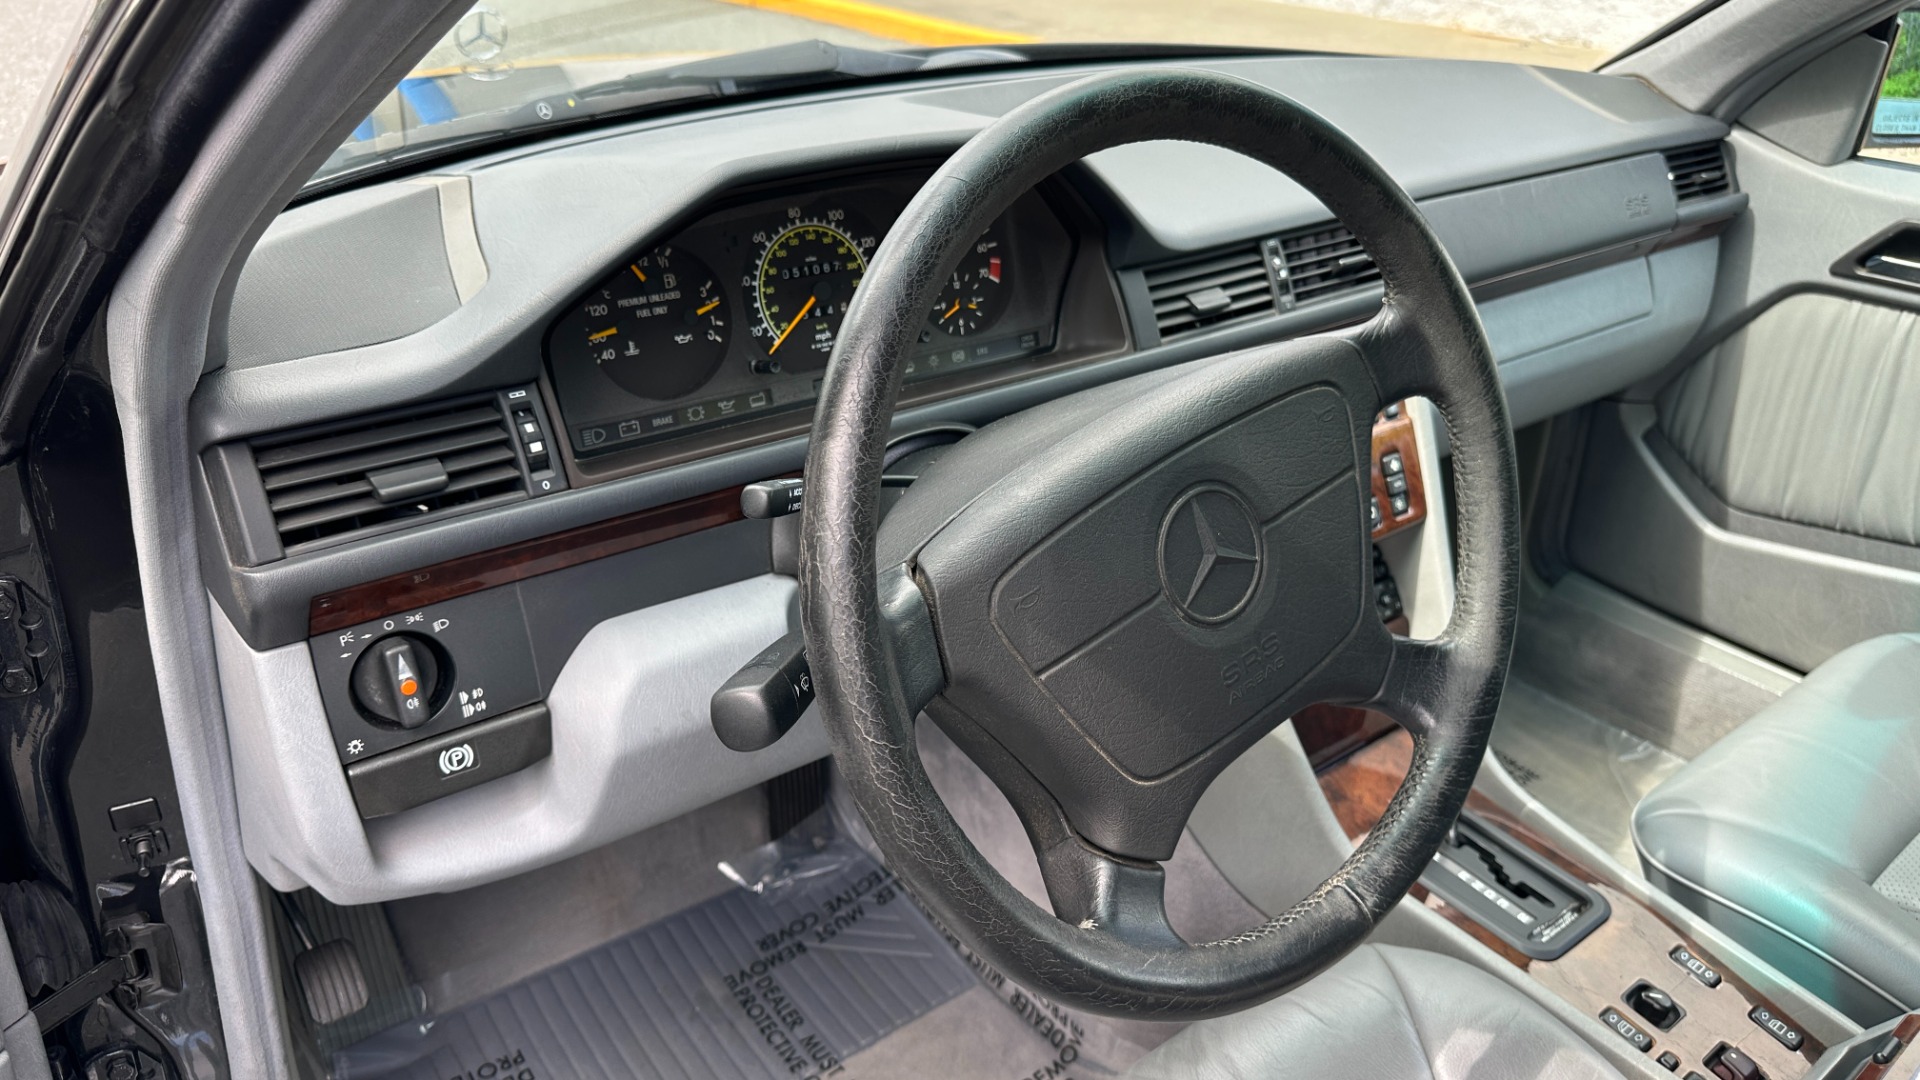 Used 1994 Mercedes-Benz 300 Series E 320 / CONVERTIBLE / MEMORY / POWER TOP / INLINE 6CYL / LEATHER for sale $23,500 at Formula Imports in Charlotte NC 28227 23